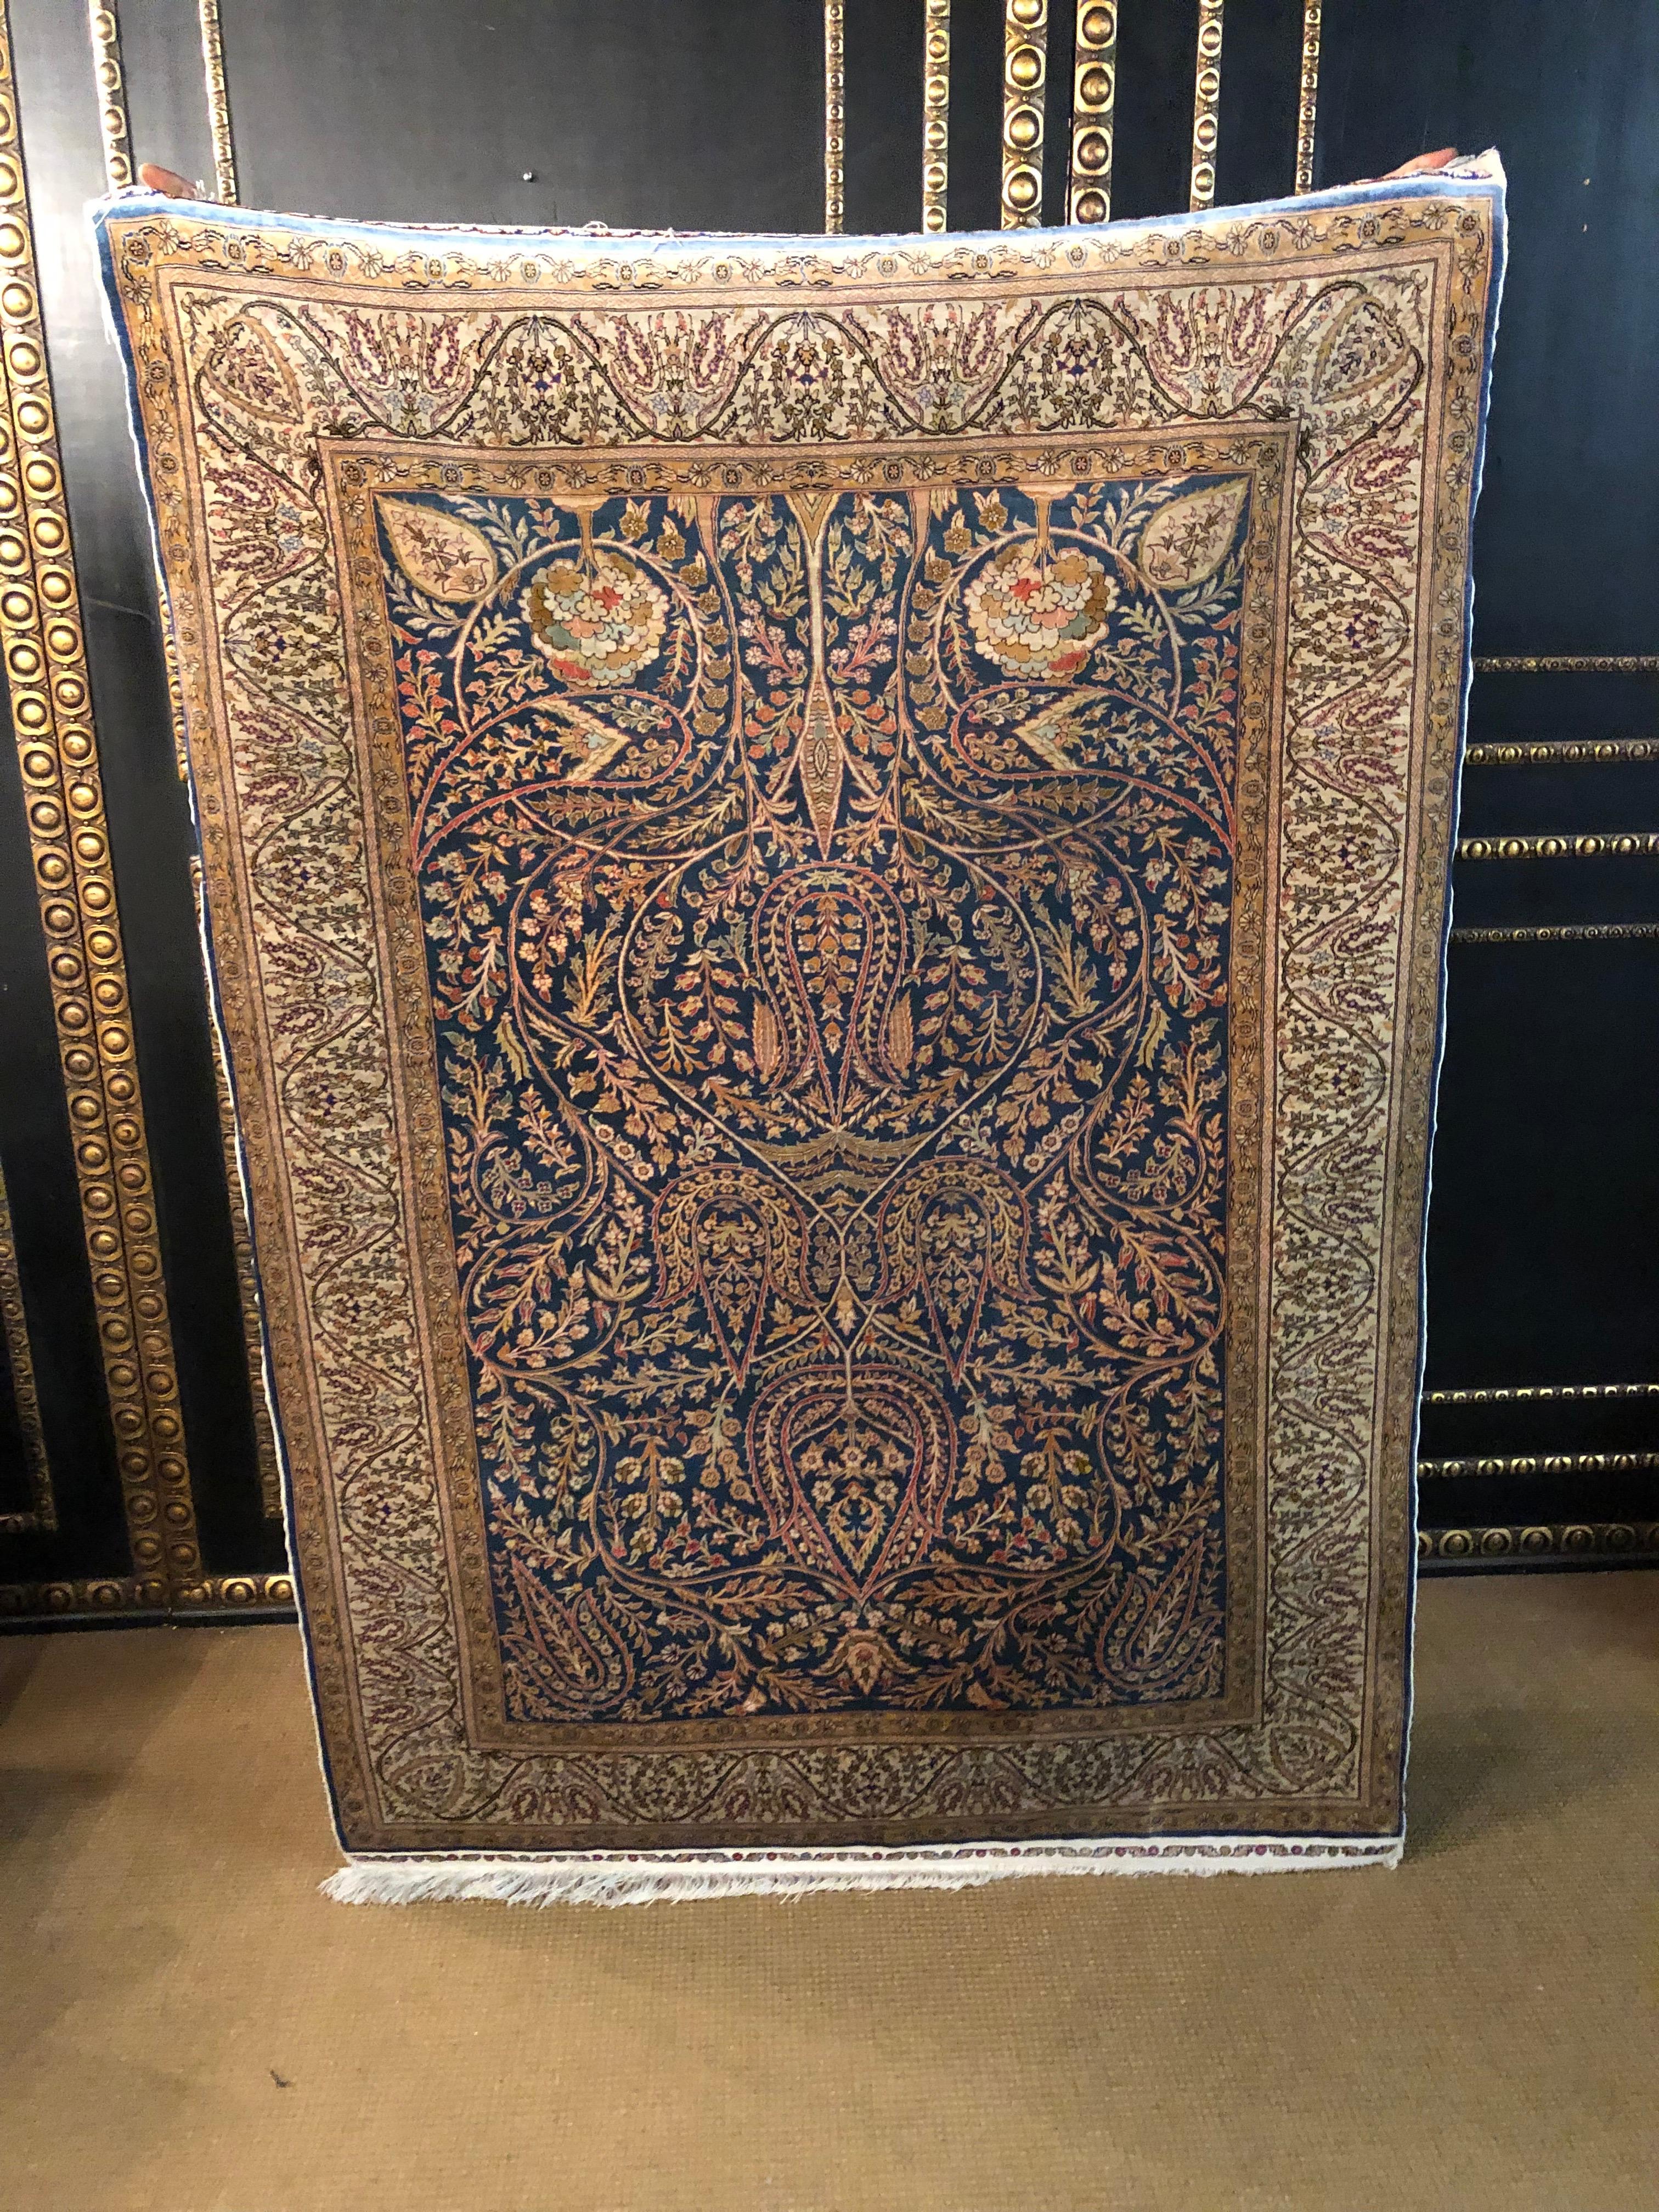 Masterpiece
of the carpet.

Pure silk with a beautiful pattern and color, top condition.
The teppioch was bought in Turkey in 1990 for 10400DM with original certificate.

Today's value about 10,000 €. Measures: 180 cm x 225 cm.